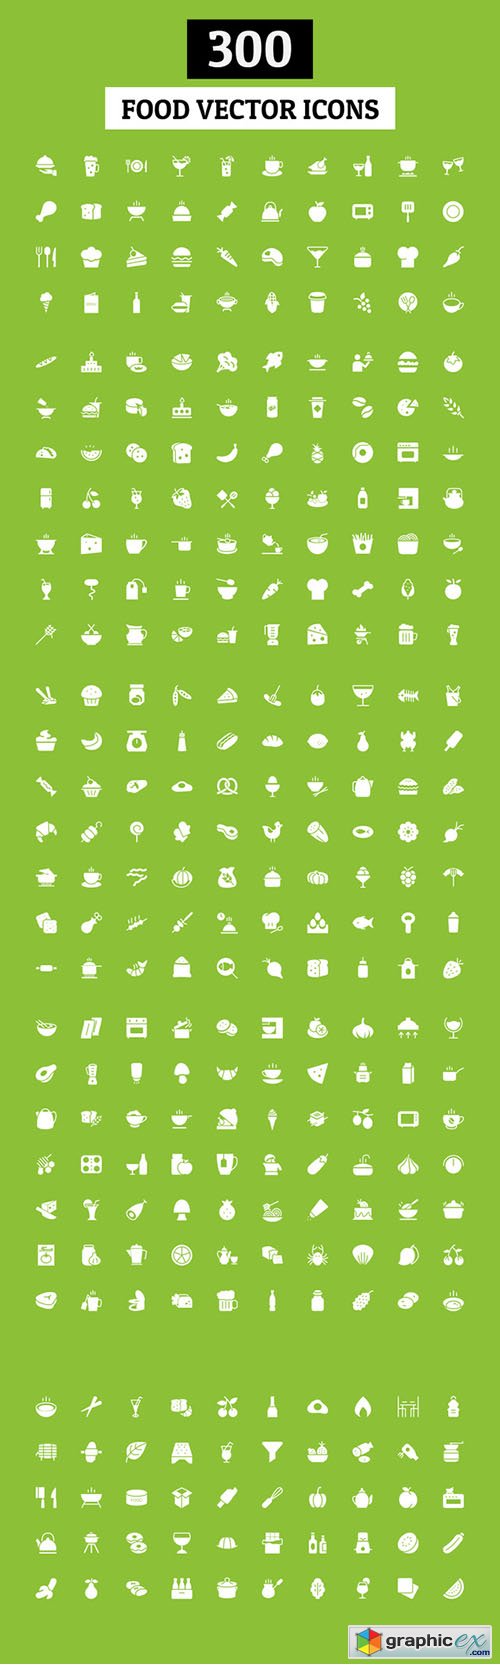  300 Food Vector Icons